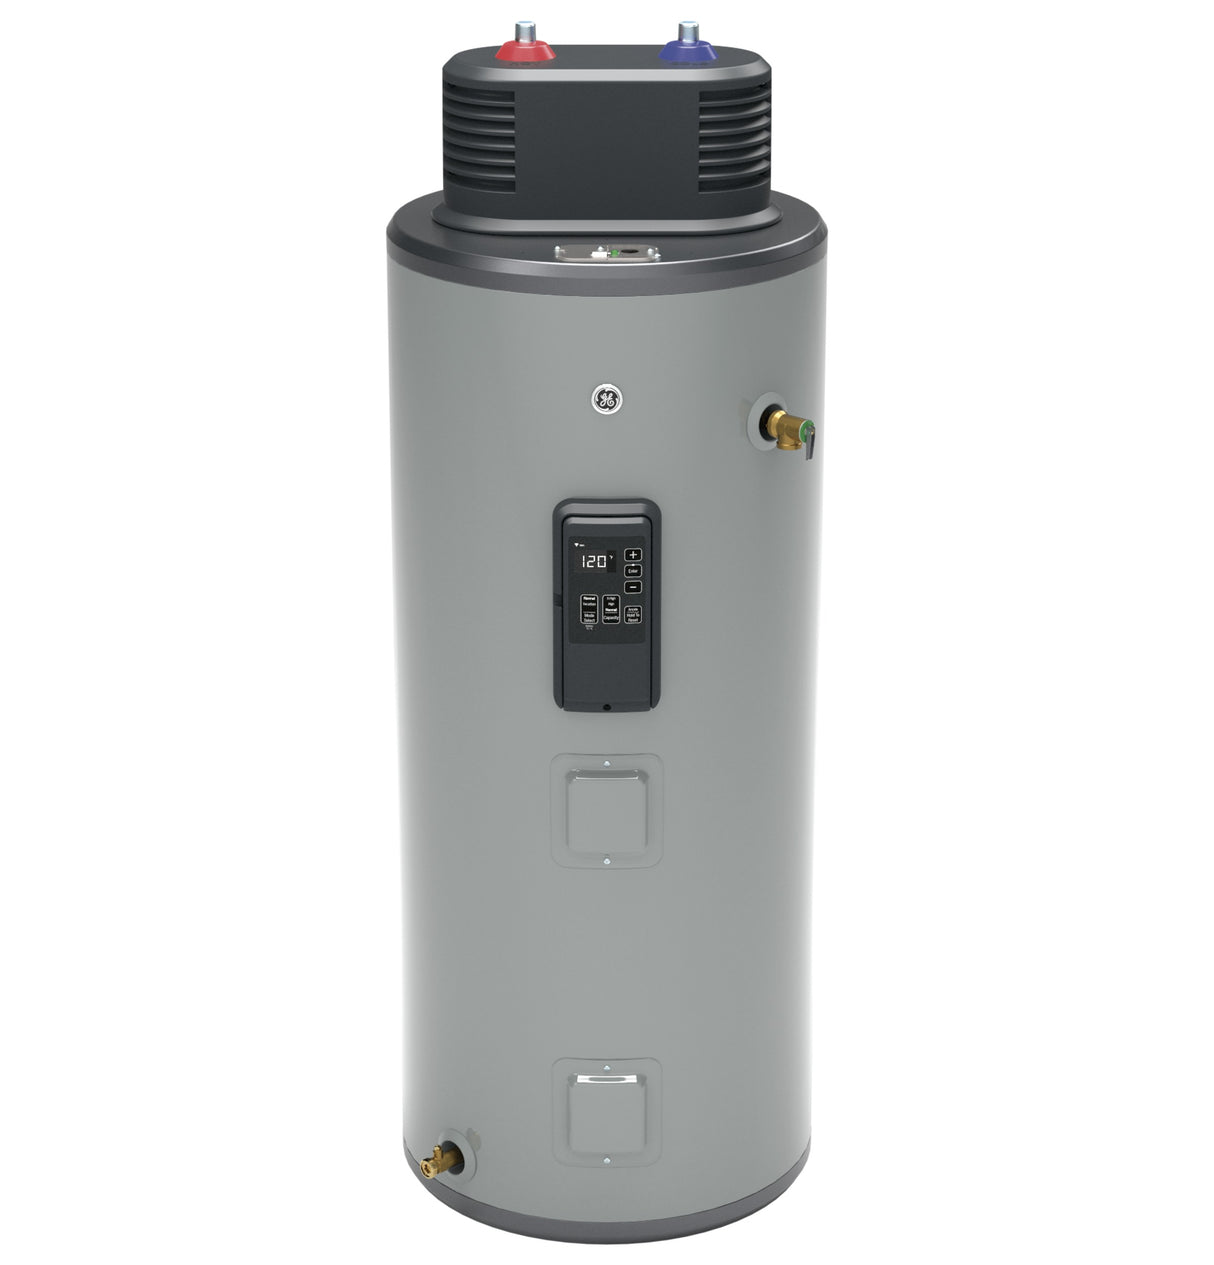 GE(R) Smart 40 Gallon Electric Water Heater with Flexible Capacity - (GE40S10BMM)